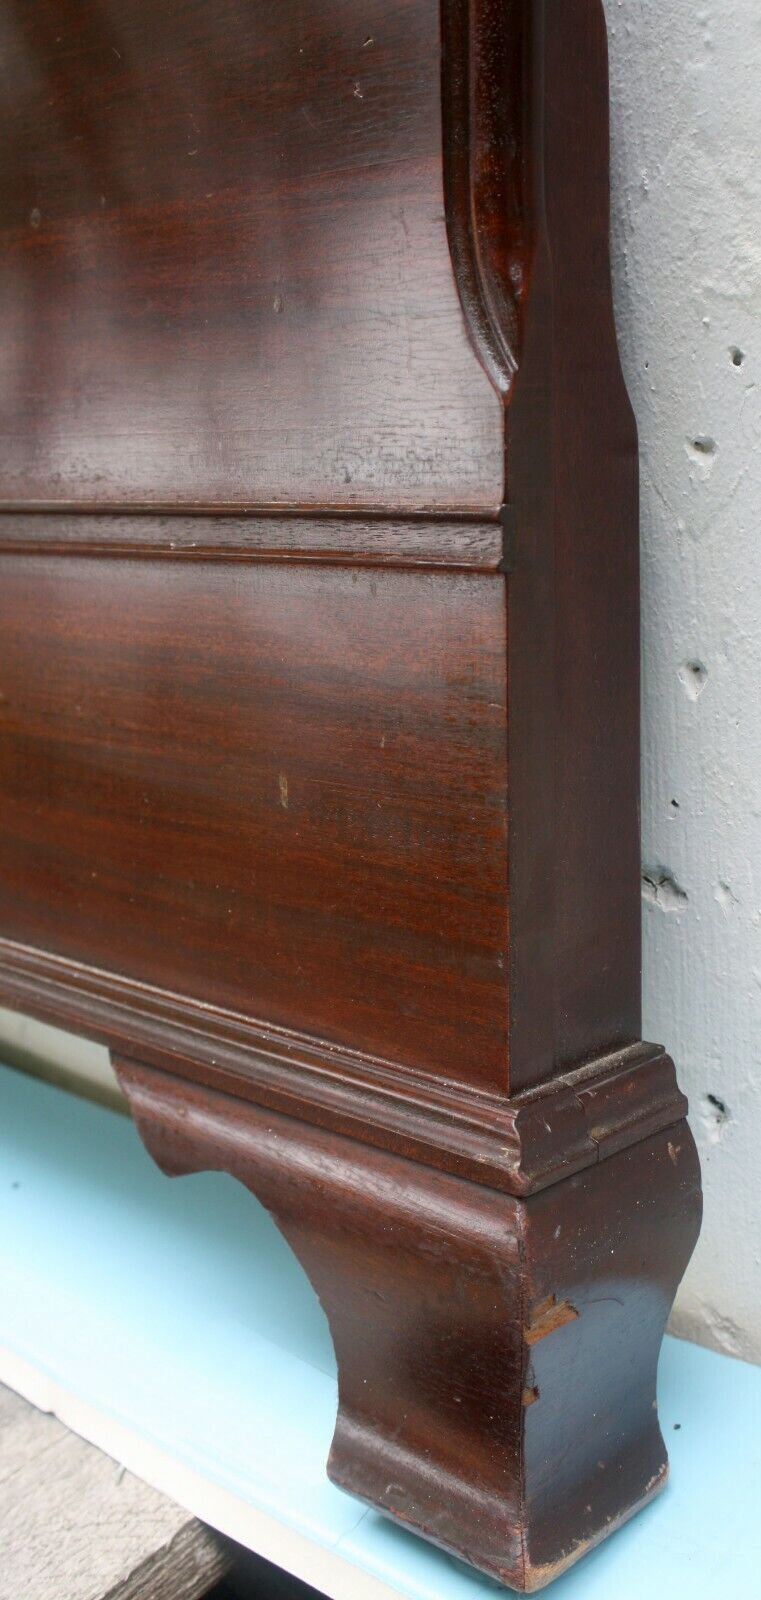 Vintage Antique Old Reclaimed Salvaged Mahogany Wood Wooden Full Sz Bed Frame Head Foot Board Headboard